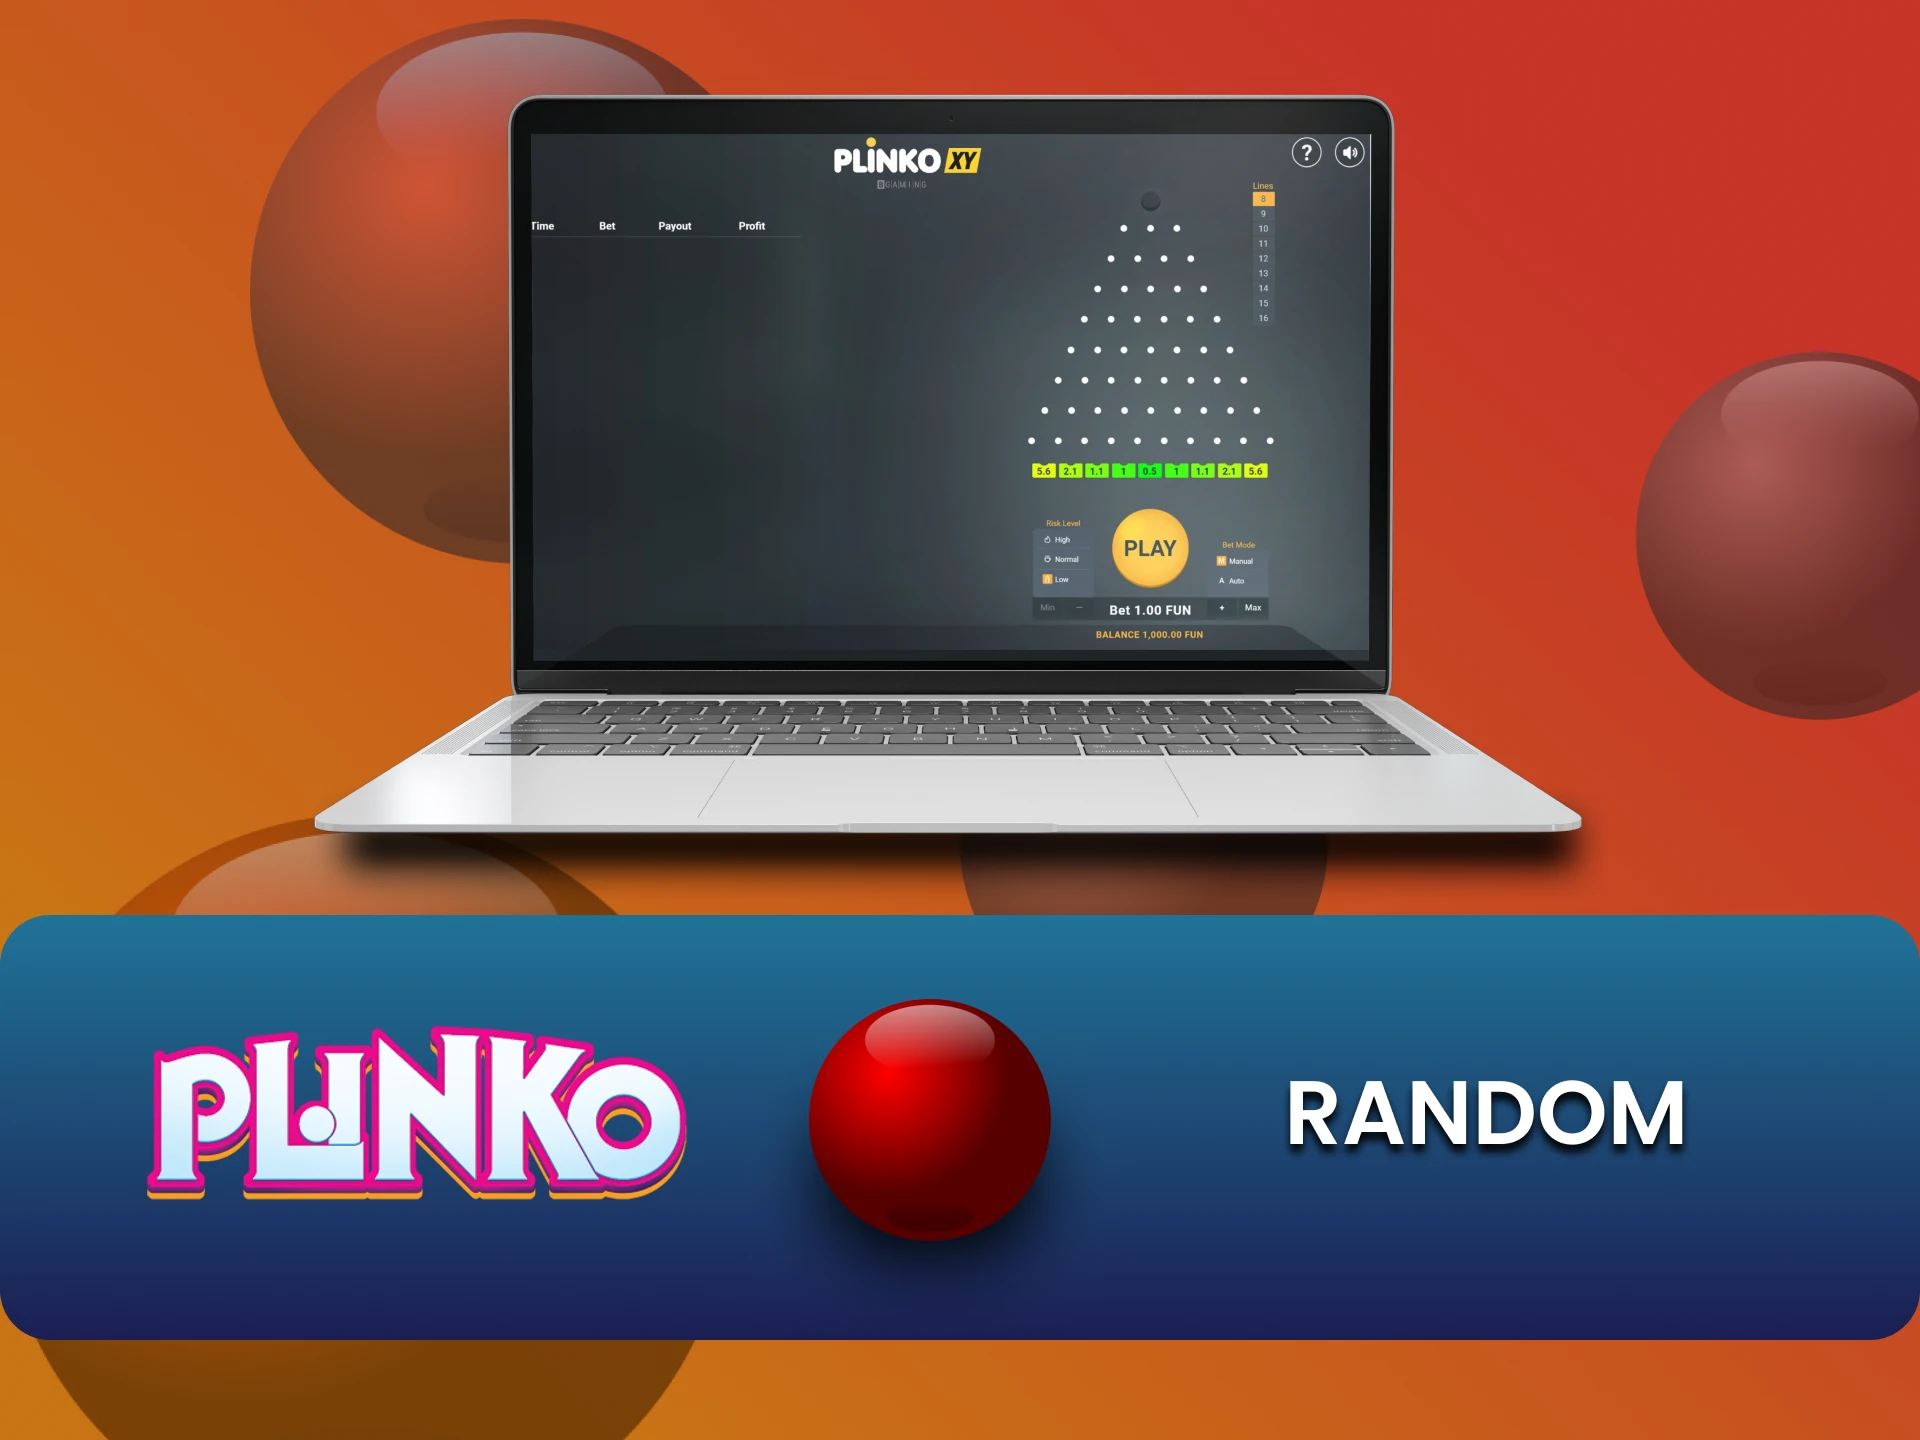 Plinko is a game that has a random system for winning.